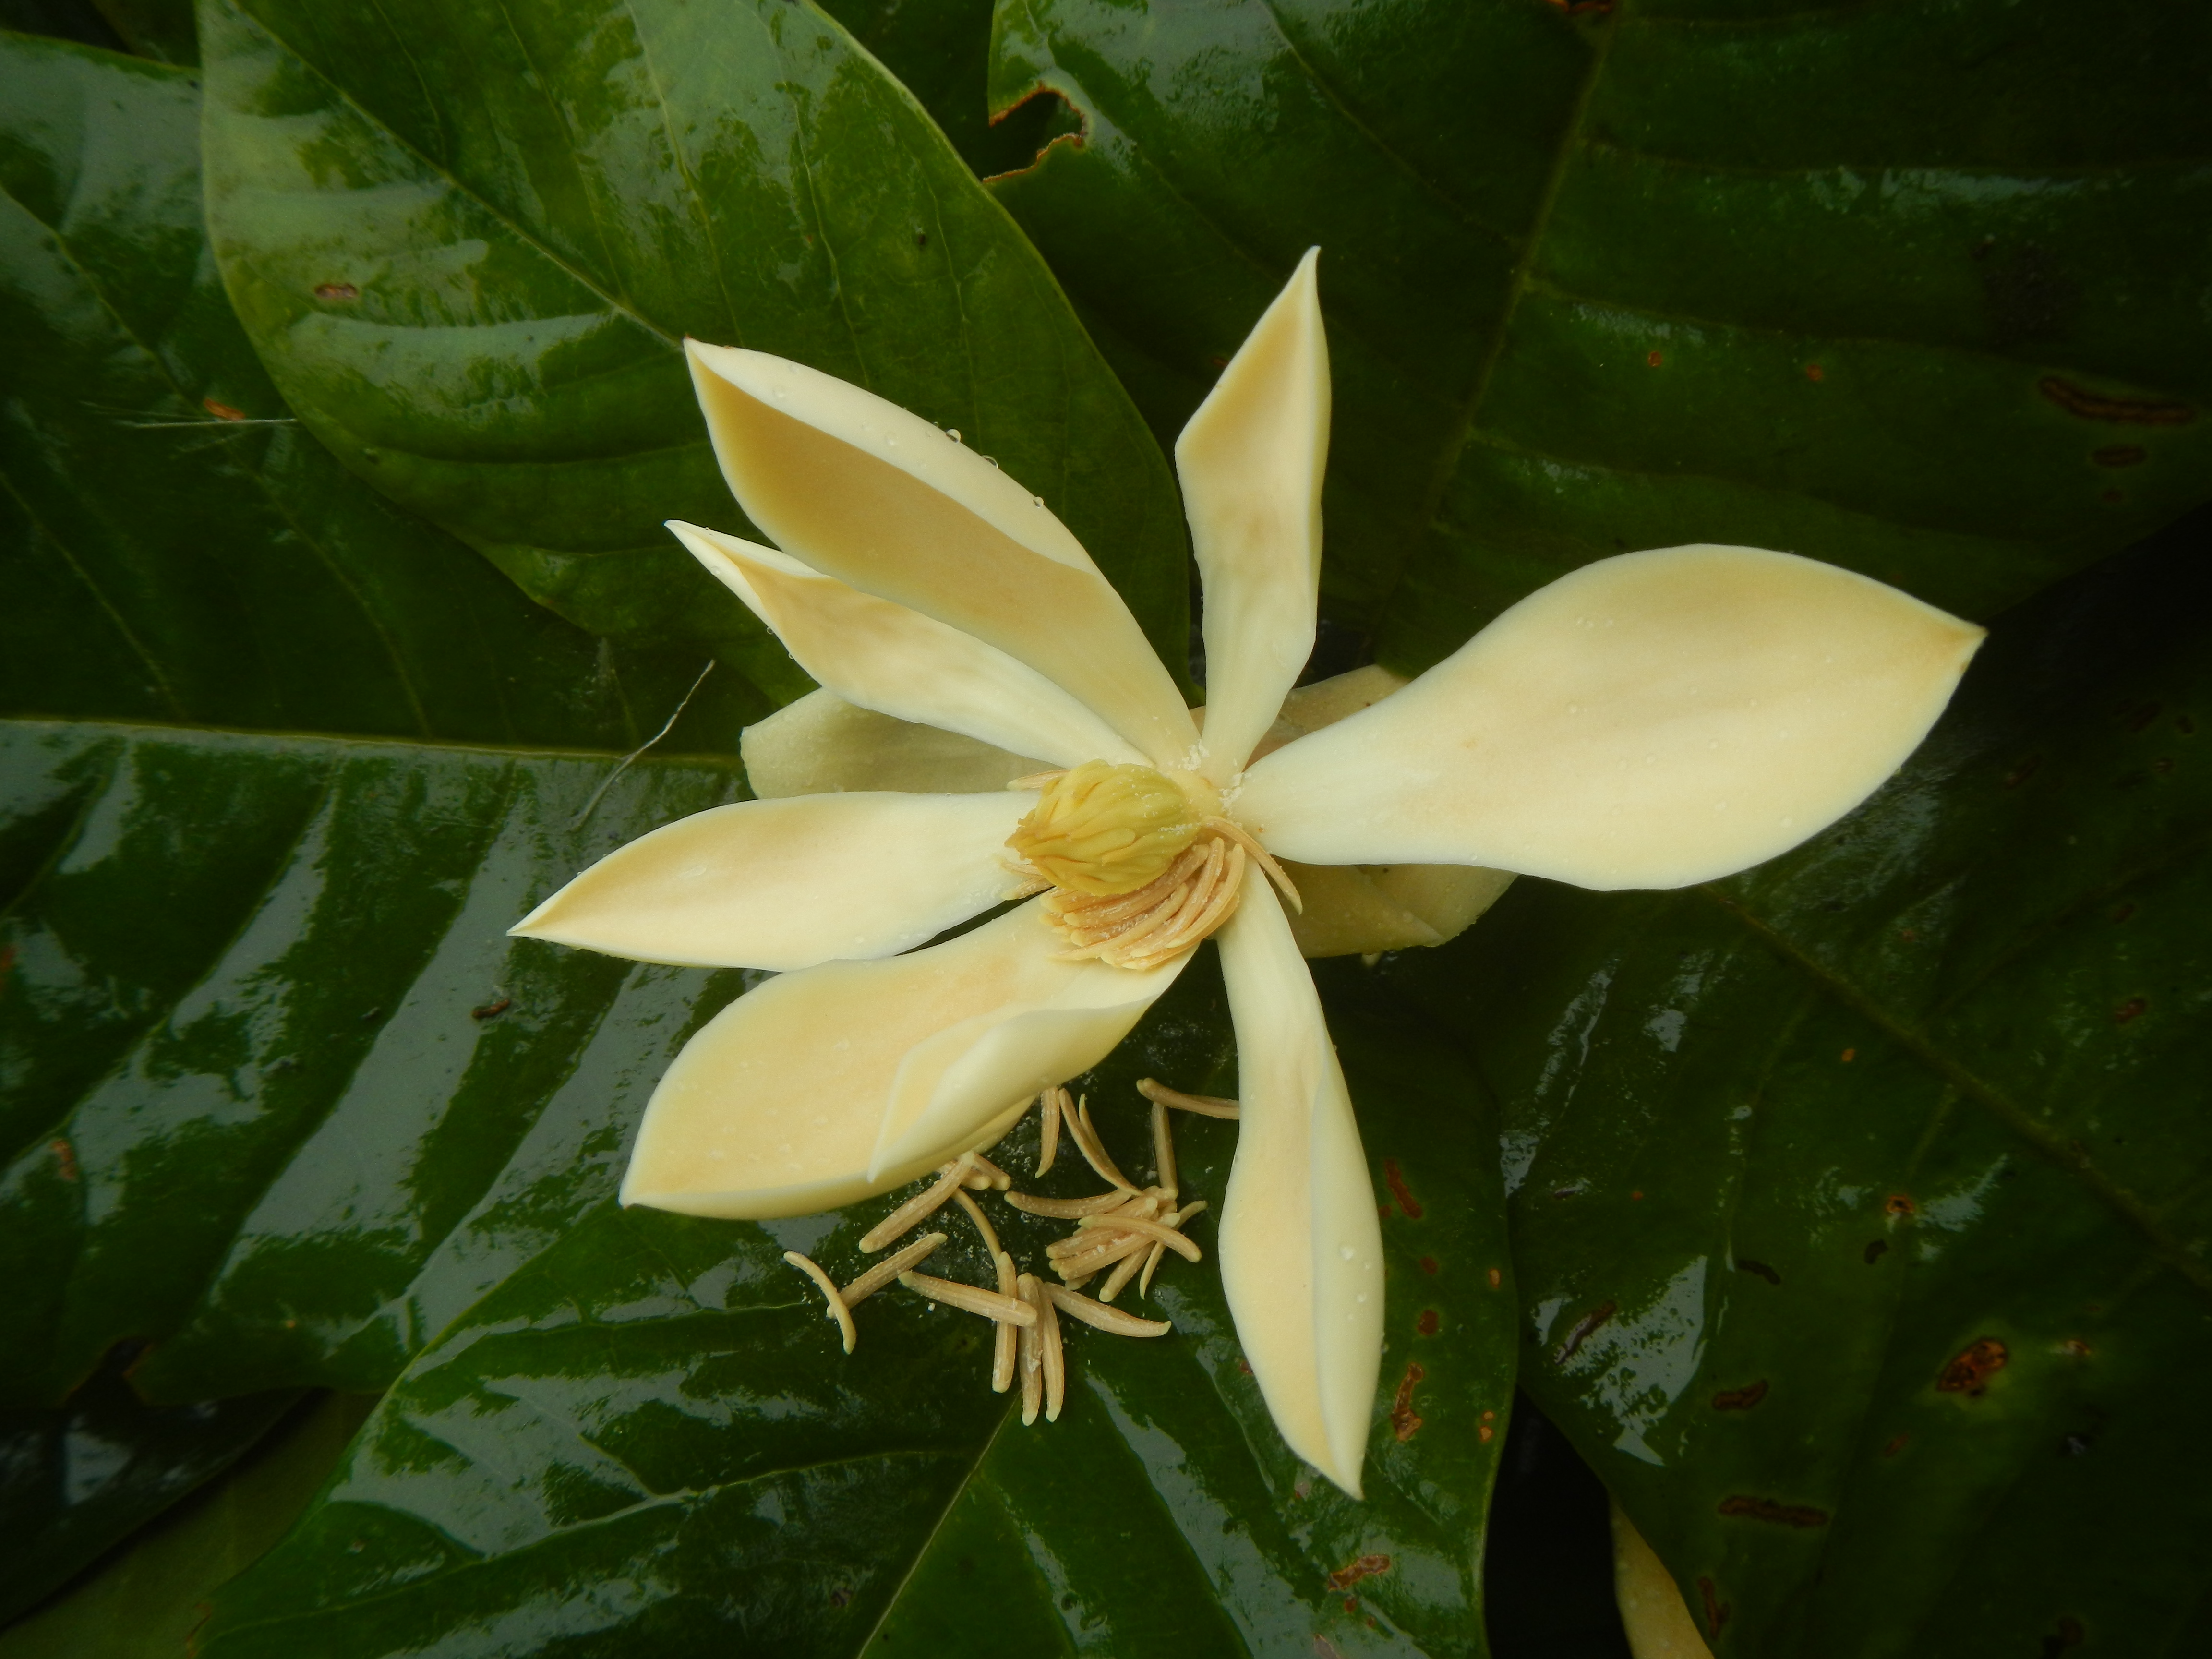 Discovery of a new species of magnolia in our Buenaventura reserve